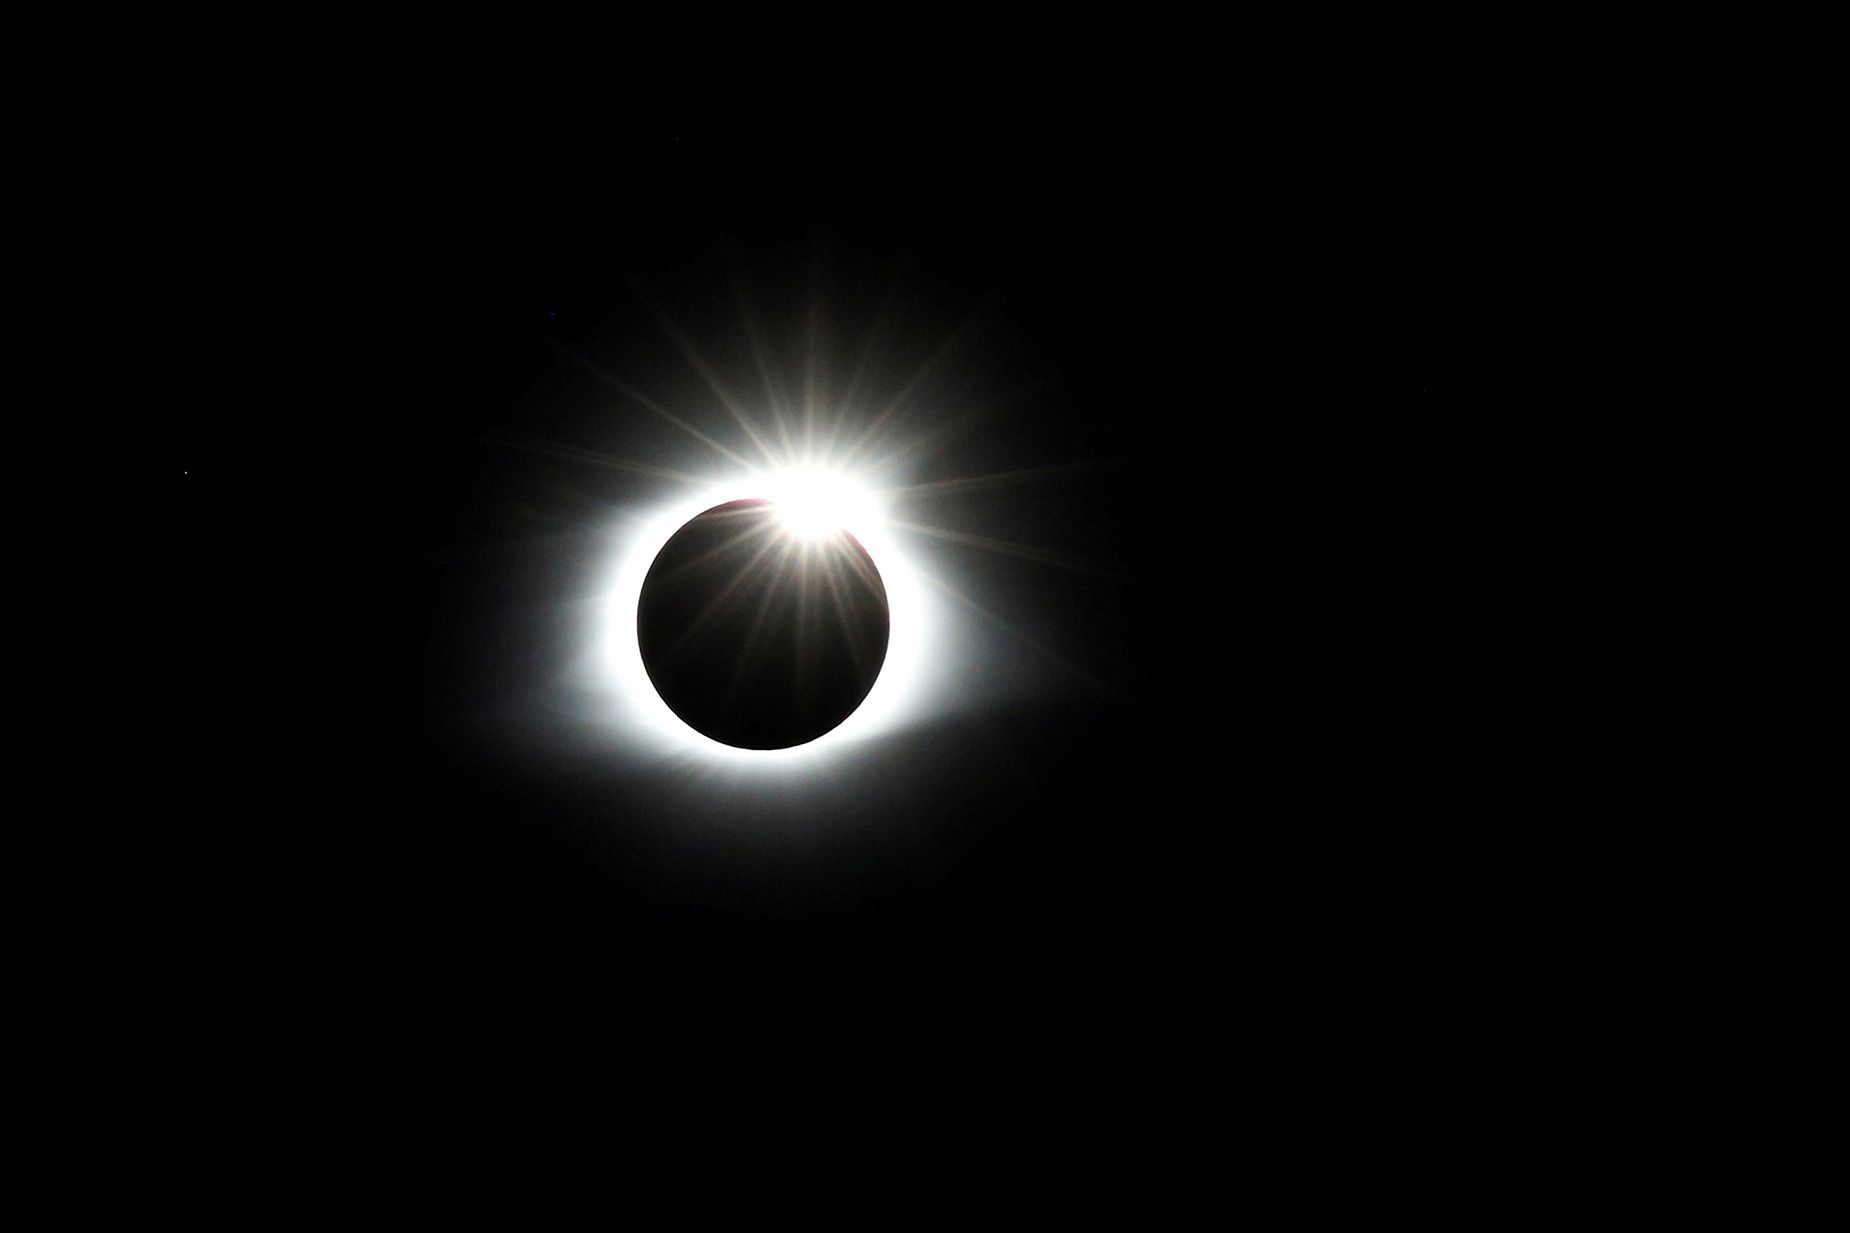 The solar eclipse creates the effect of a diamond ring during the solar eclipse on August 21, 2017, as seen from Clingmans Dome, which at 6,643 feet (2,025 meters) is the highest point in the Great Smoky Mountains National Park in Tennessee.